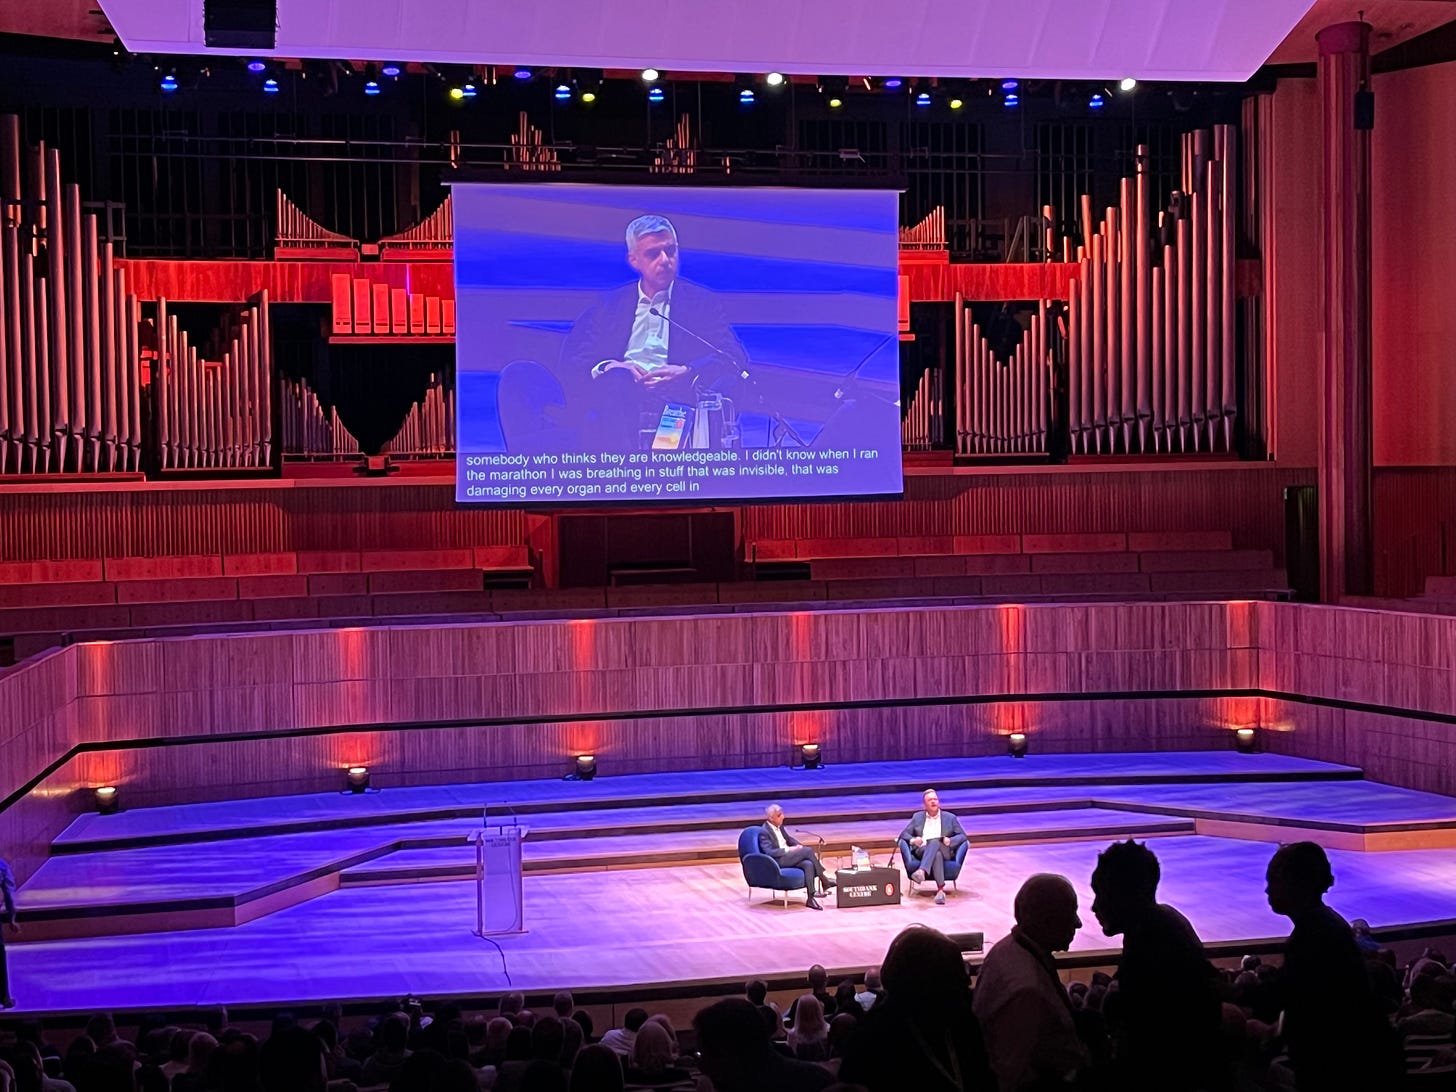 Photograph of Sadiq Khan and James O'Brien on stage